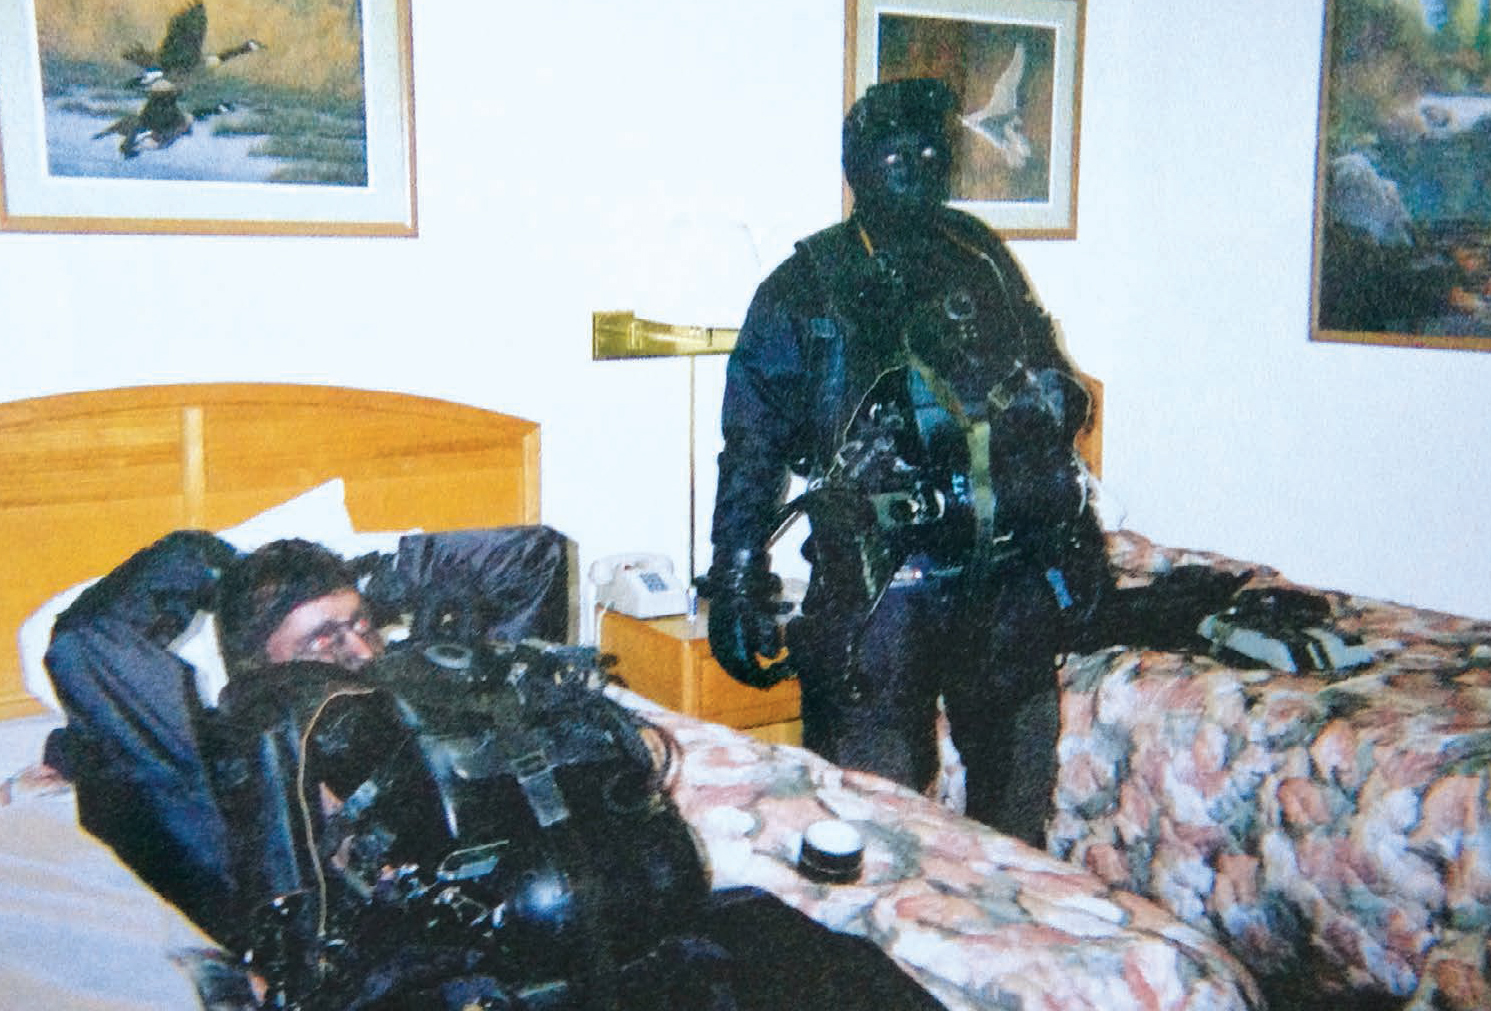 My swim buddy and me in our hotel room waiting for the call to go board the U-Haul. Taken during the Ketchikan exercise.